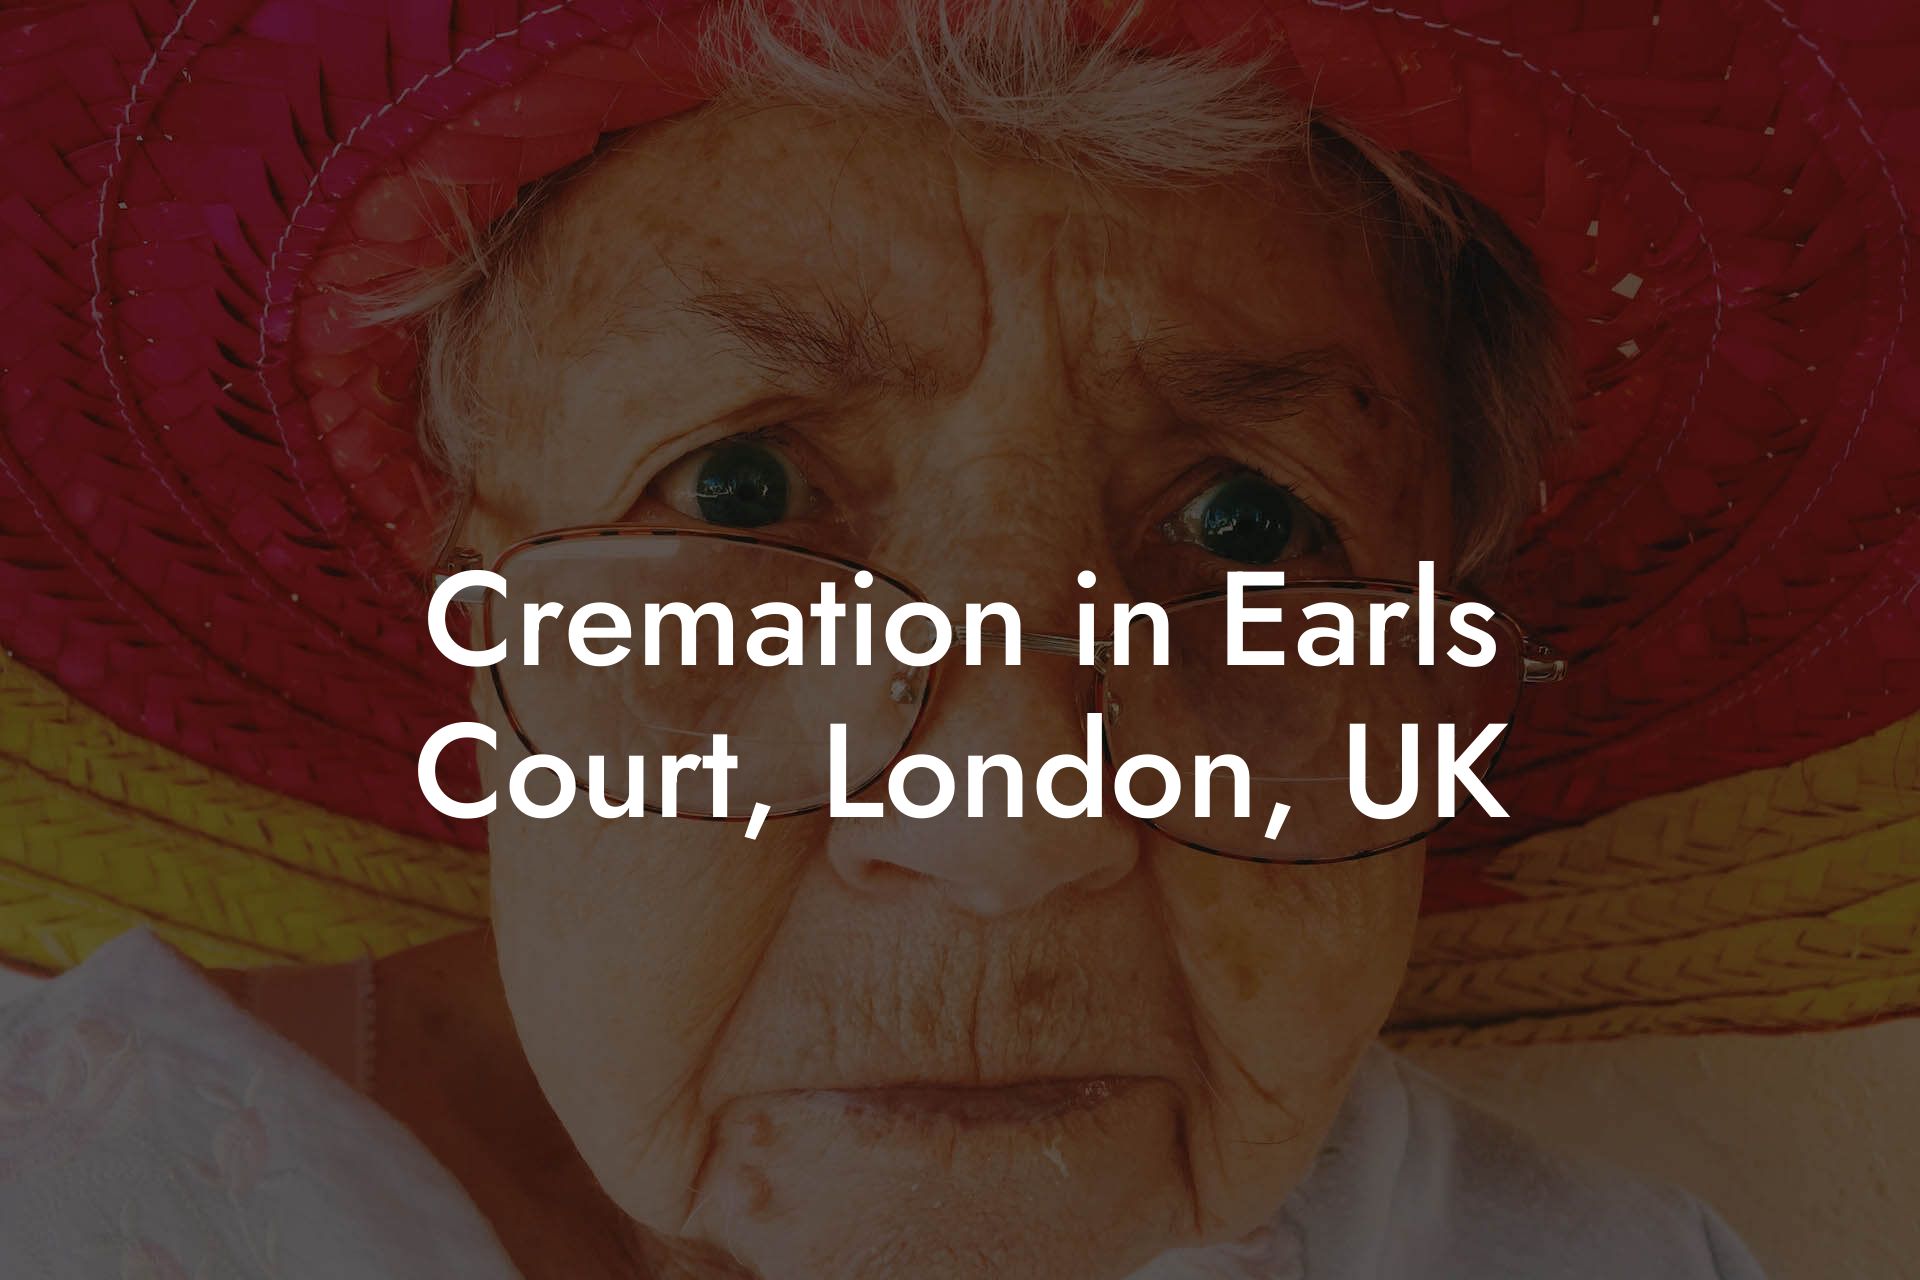 Cremation in Earls Court, London, UK